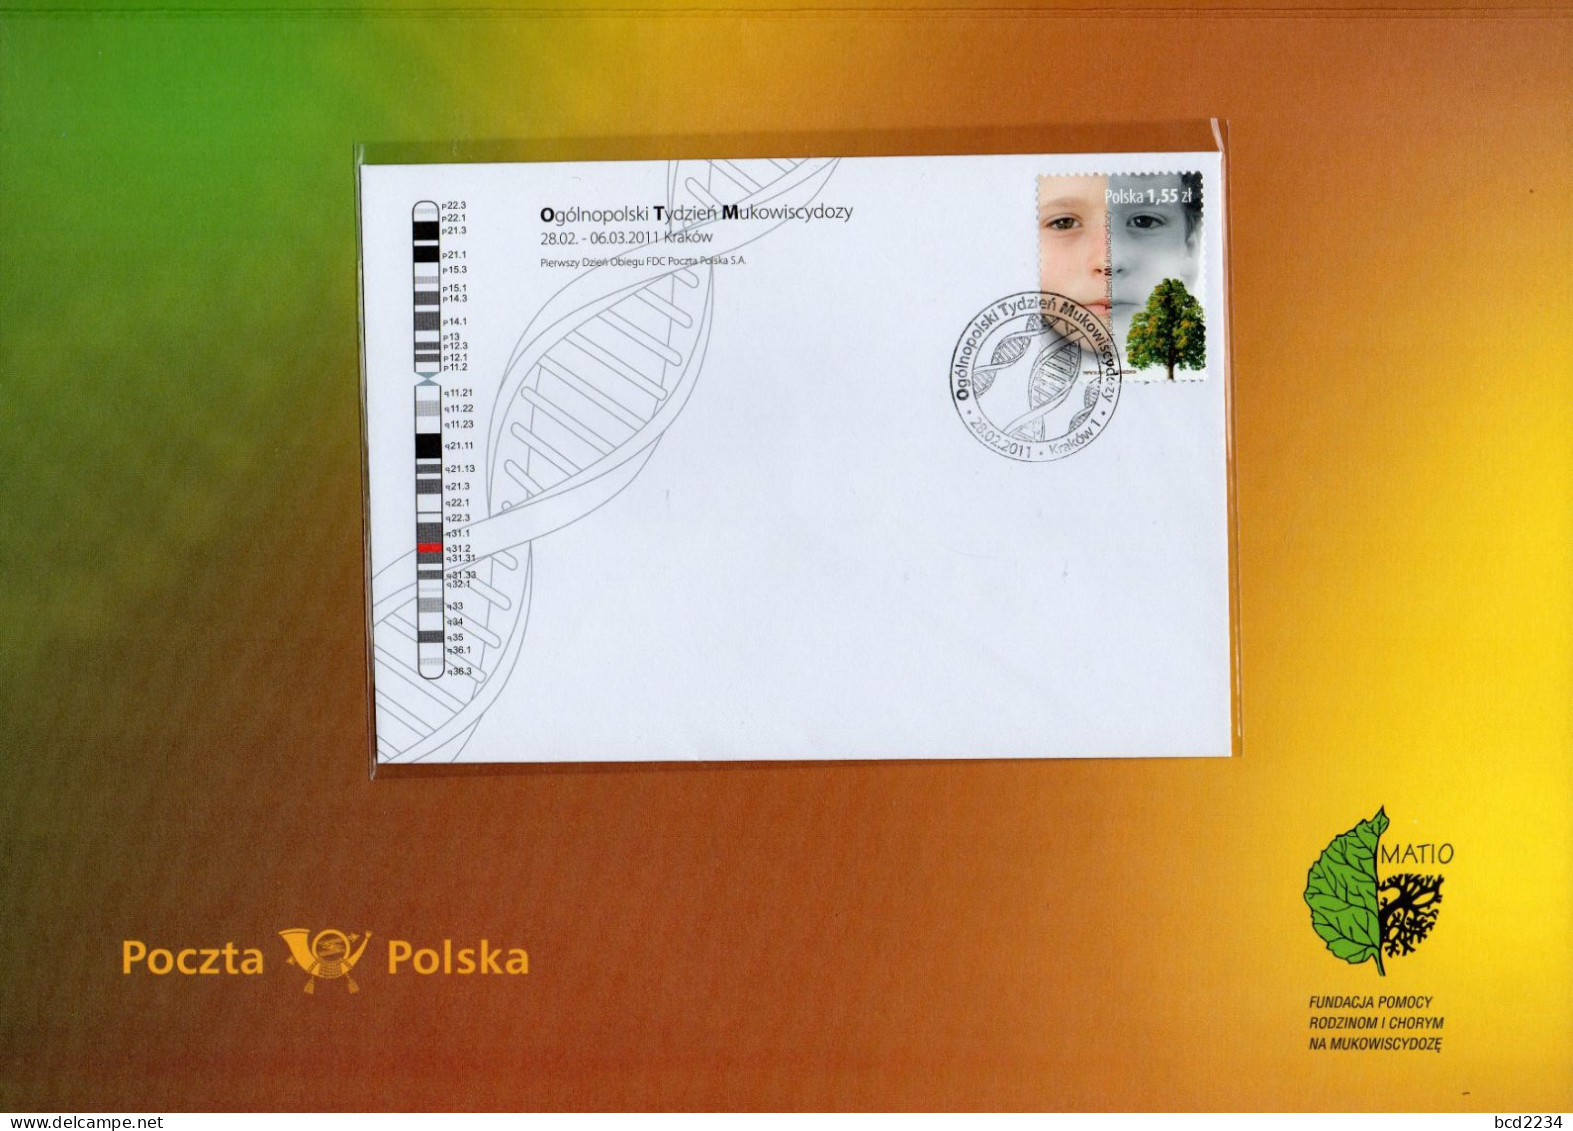 POLAND 2011 SPECIAL LIMITED EDITION PHILATELIC FOLDER: POLISH NATIONAL CYSTIC FIBROSIS WEEK FDC GENETIC DISORDER DISEASE - Médecine